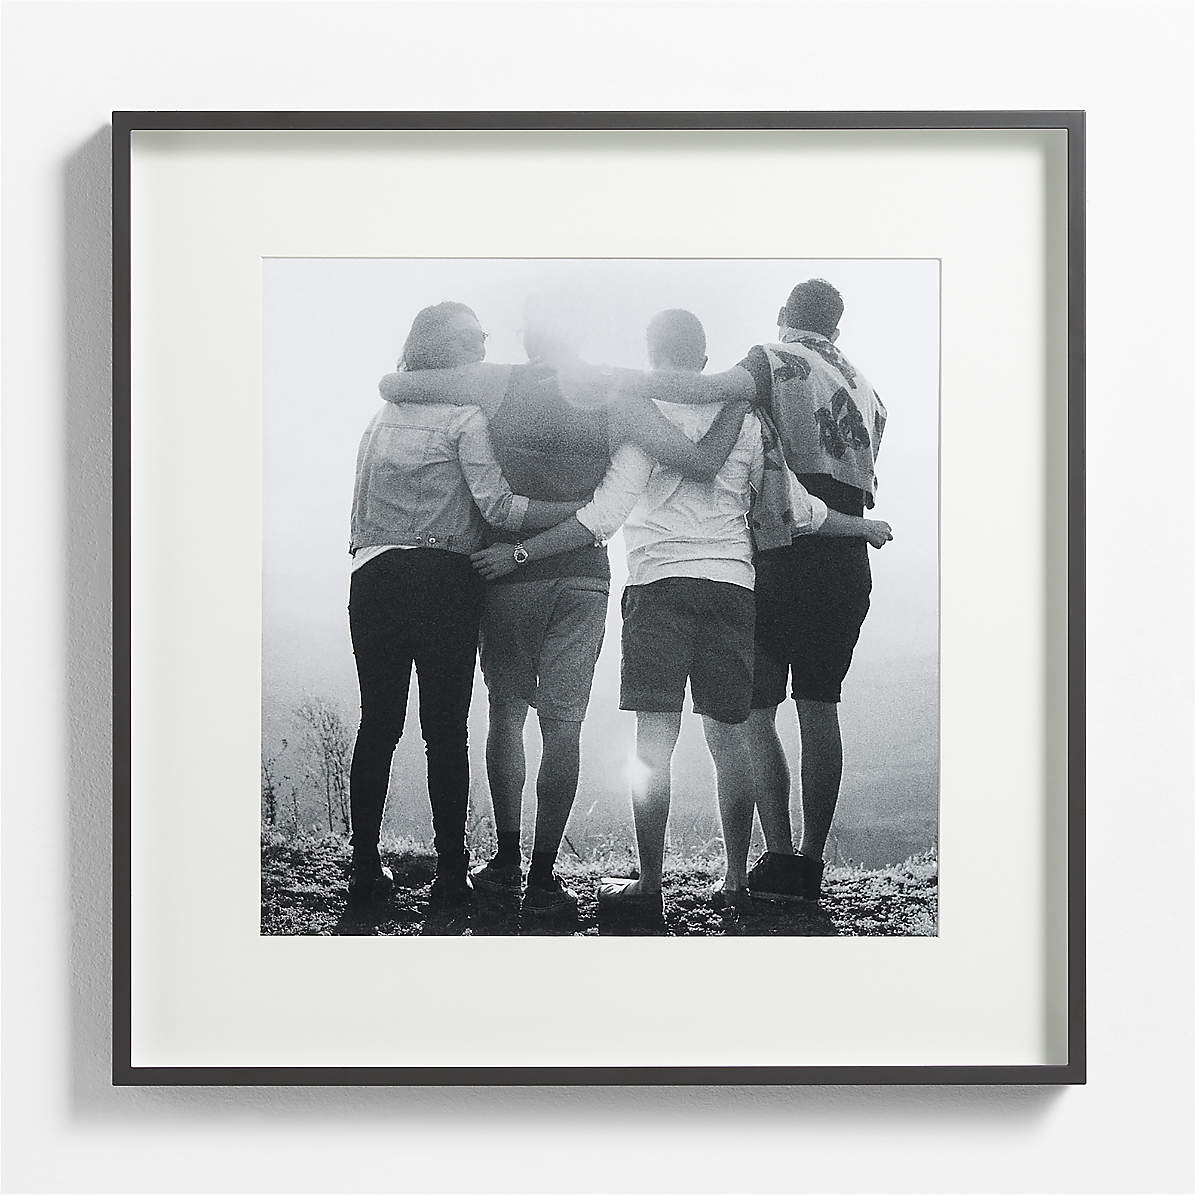 Toelating Een zin Goed doen Brushed Black 18" Square Wall Photo Picture Frame + Reviews | Crate & Barrel